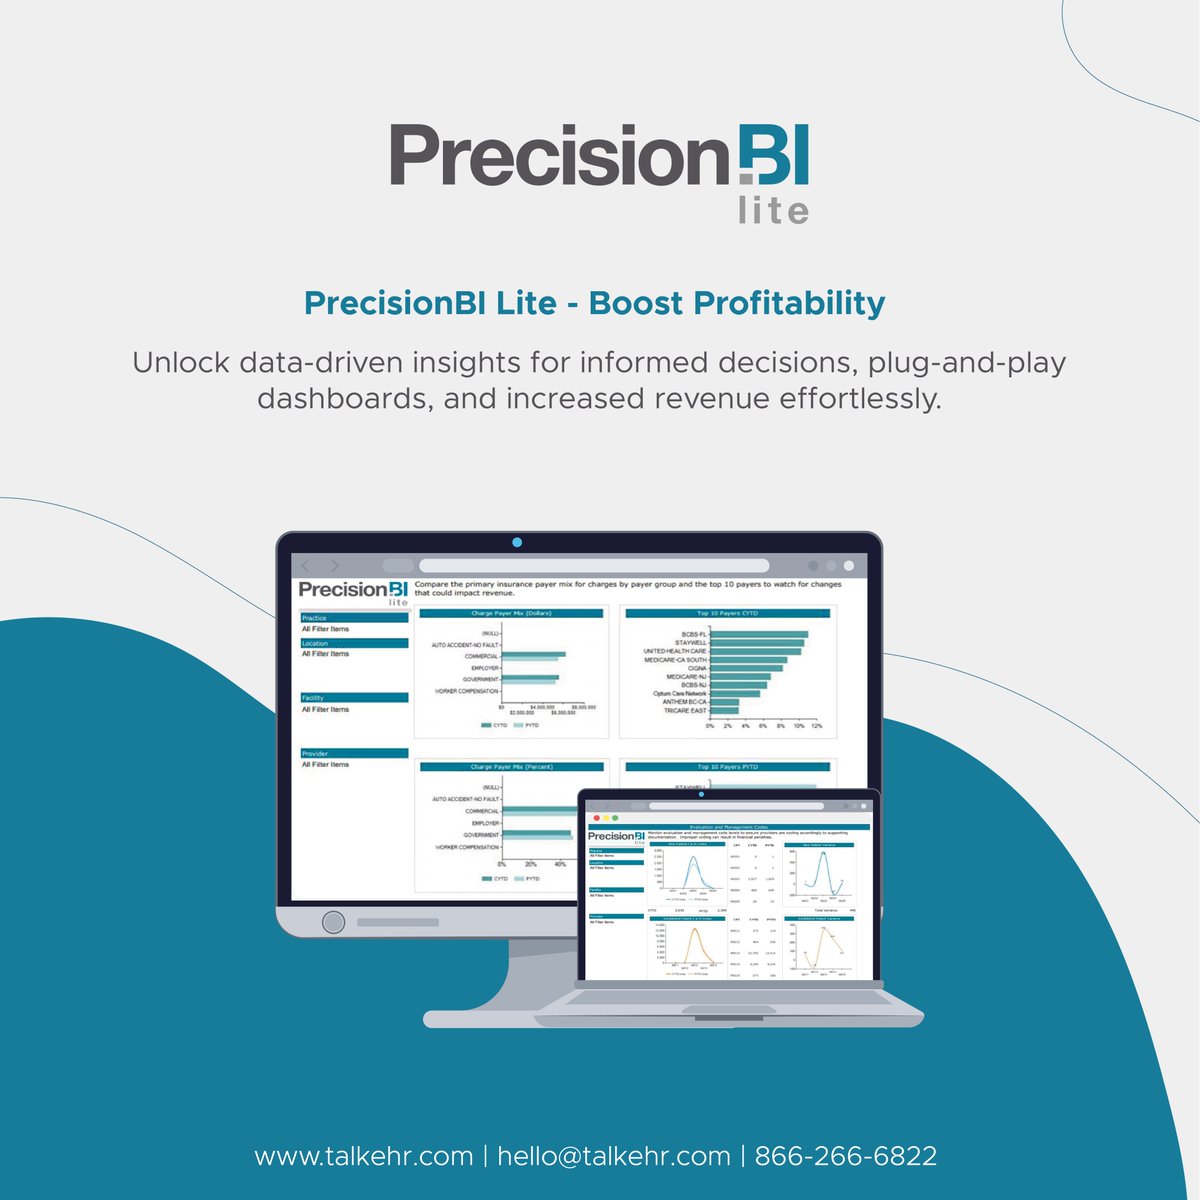 Experience the power of informed decisions and care optimization with PrecisionBI Lite. Trusted by #healthcare professionals nationwide.
Learn more: bit.ly/3KYXdob
#PrecisionBILite #talkEHR #HealthcareAnalytics #healthcareanalytics